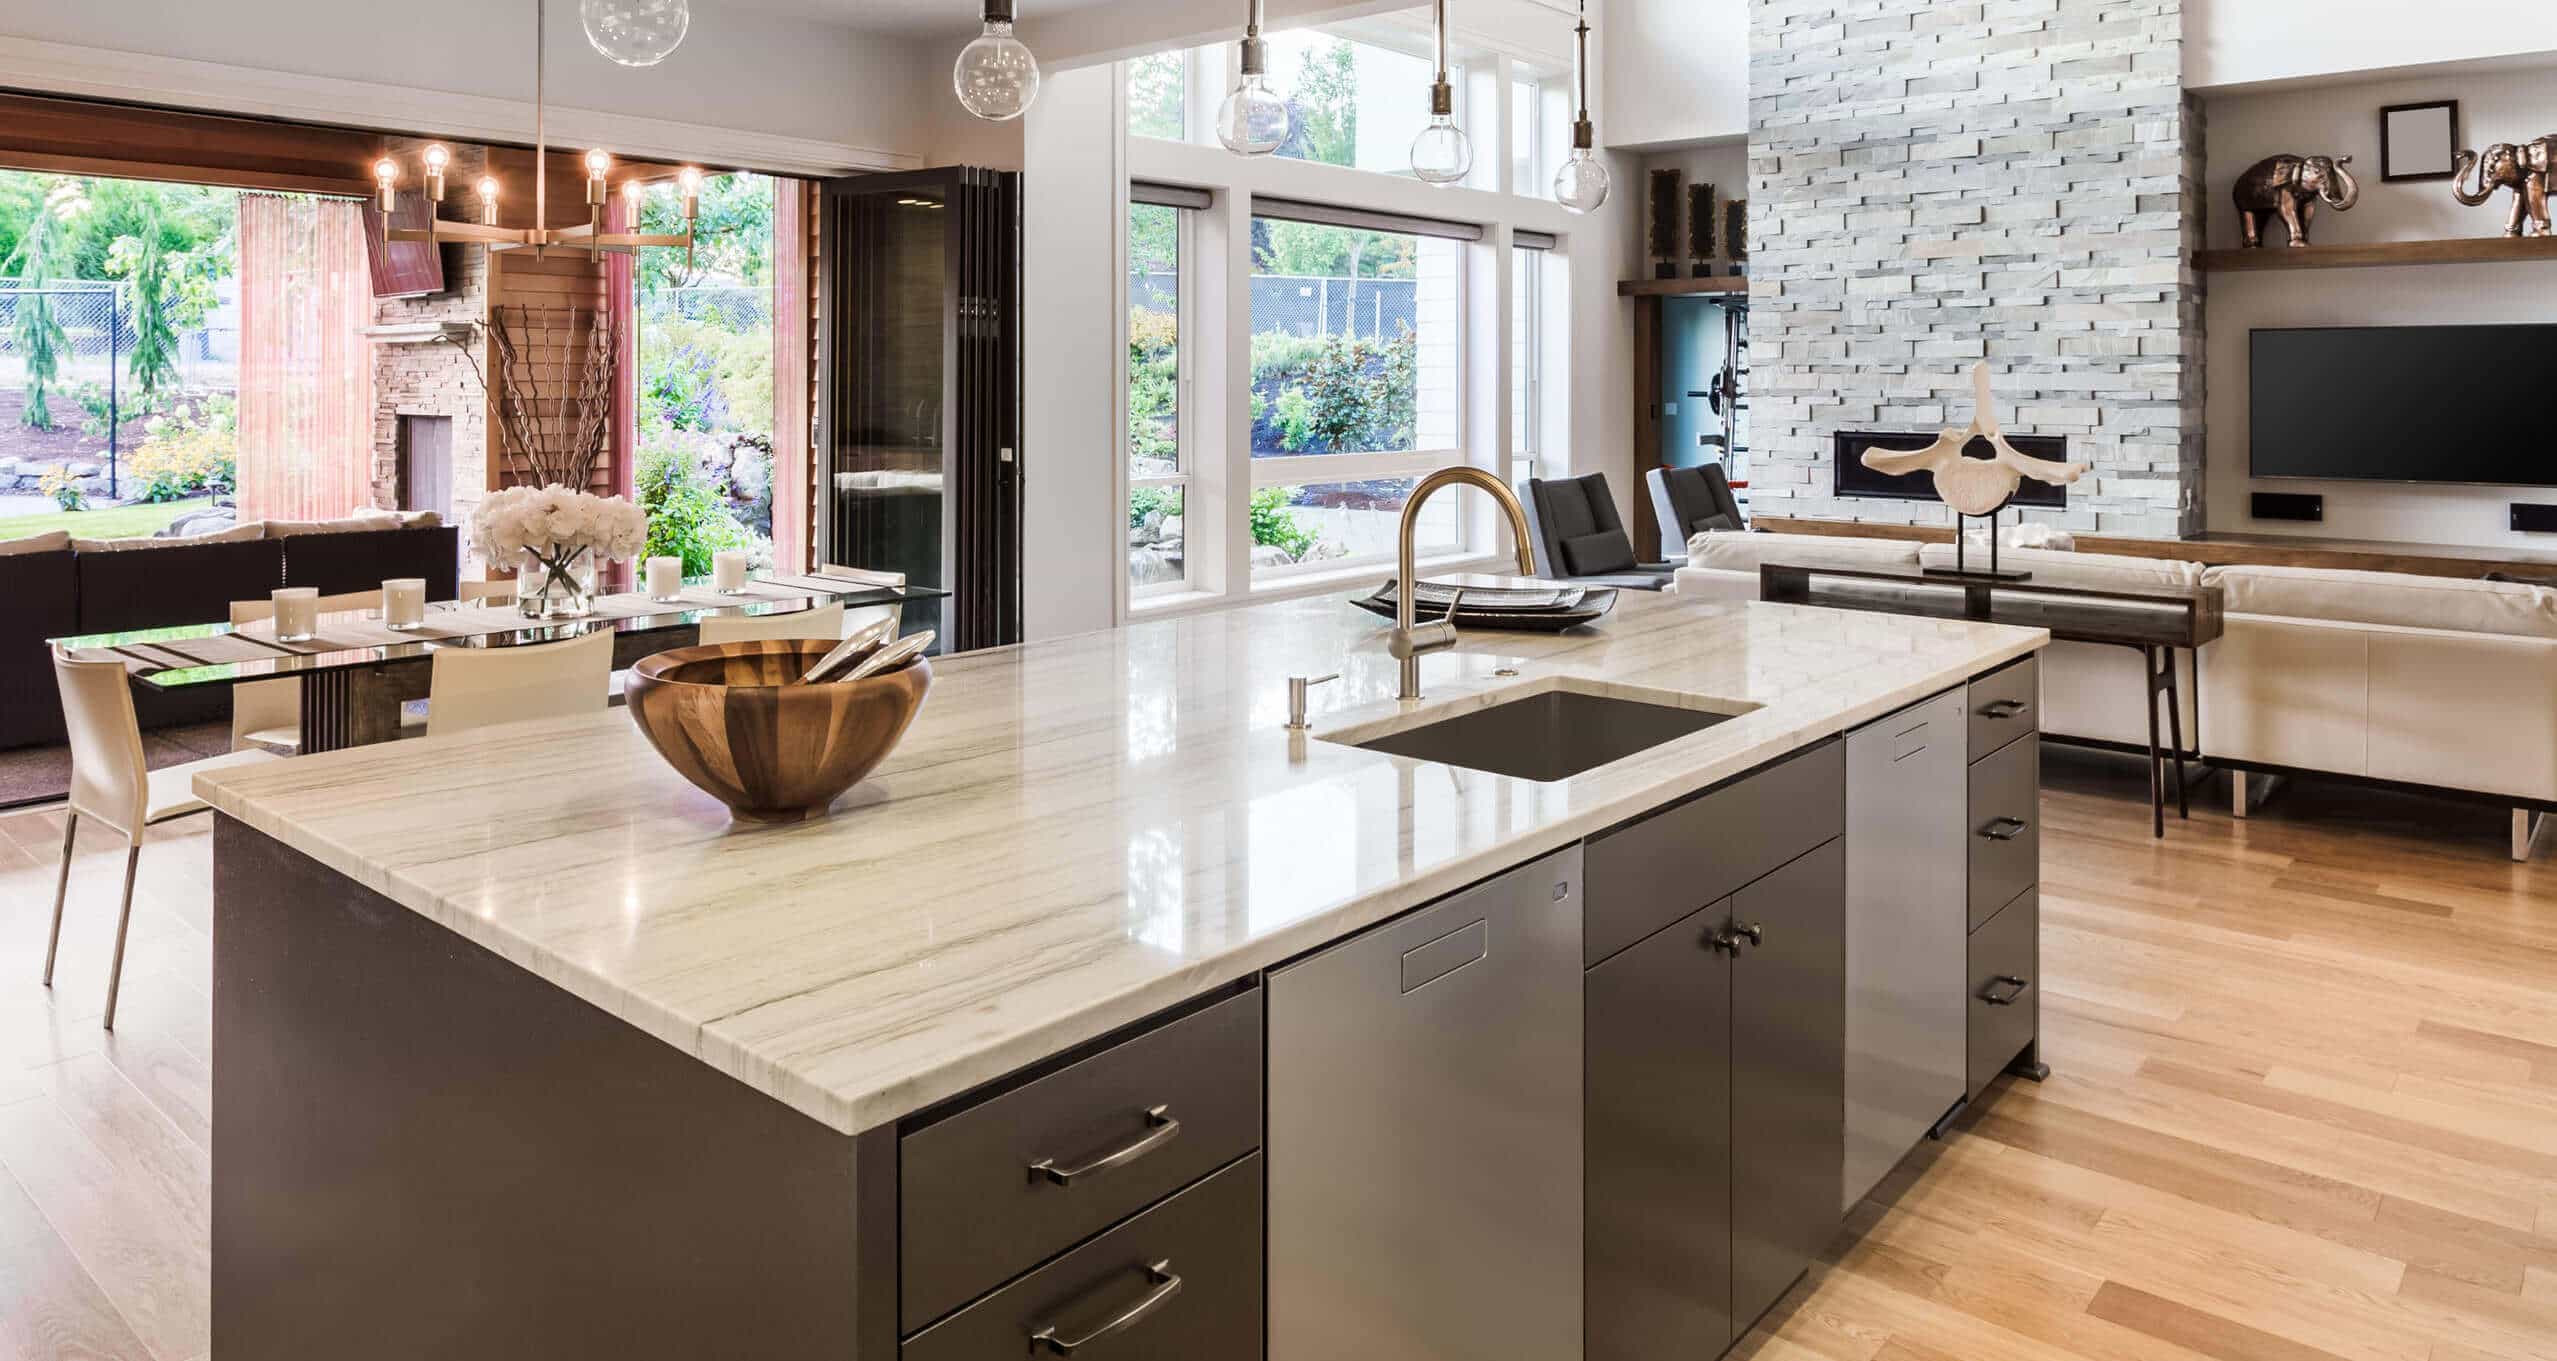 How Much Does It Cost to Renovate a Kitchen? How Much Does It Cost To Refloor A Kitchen